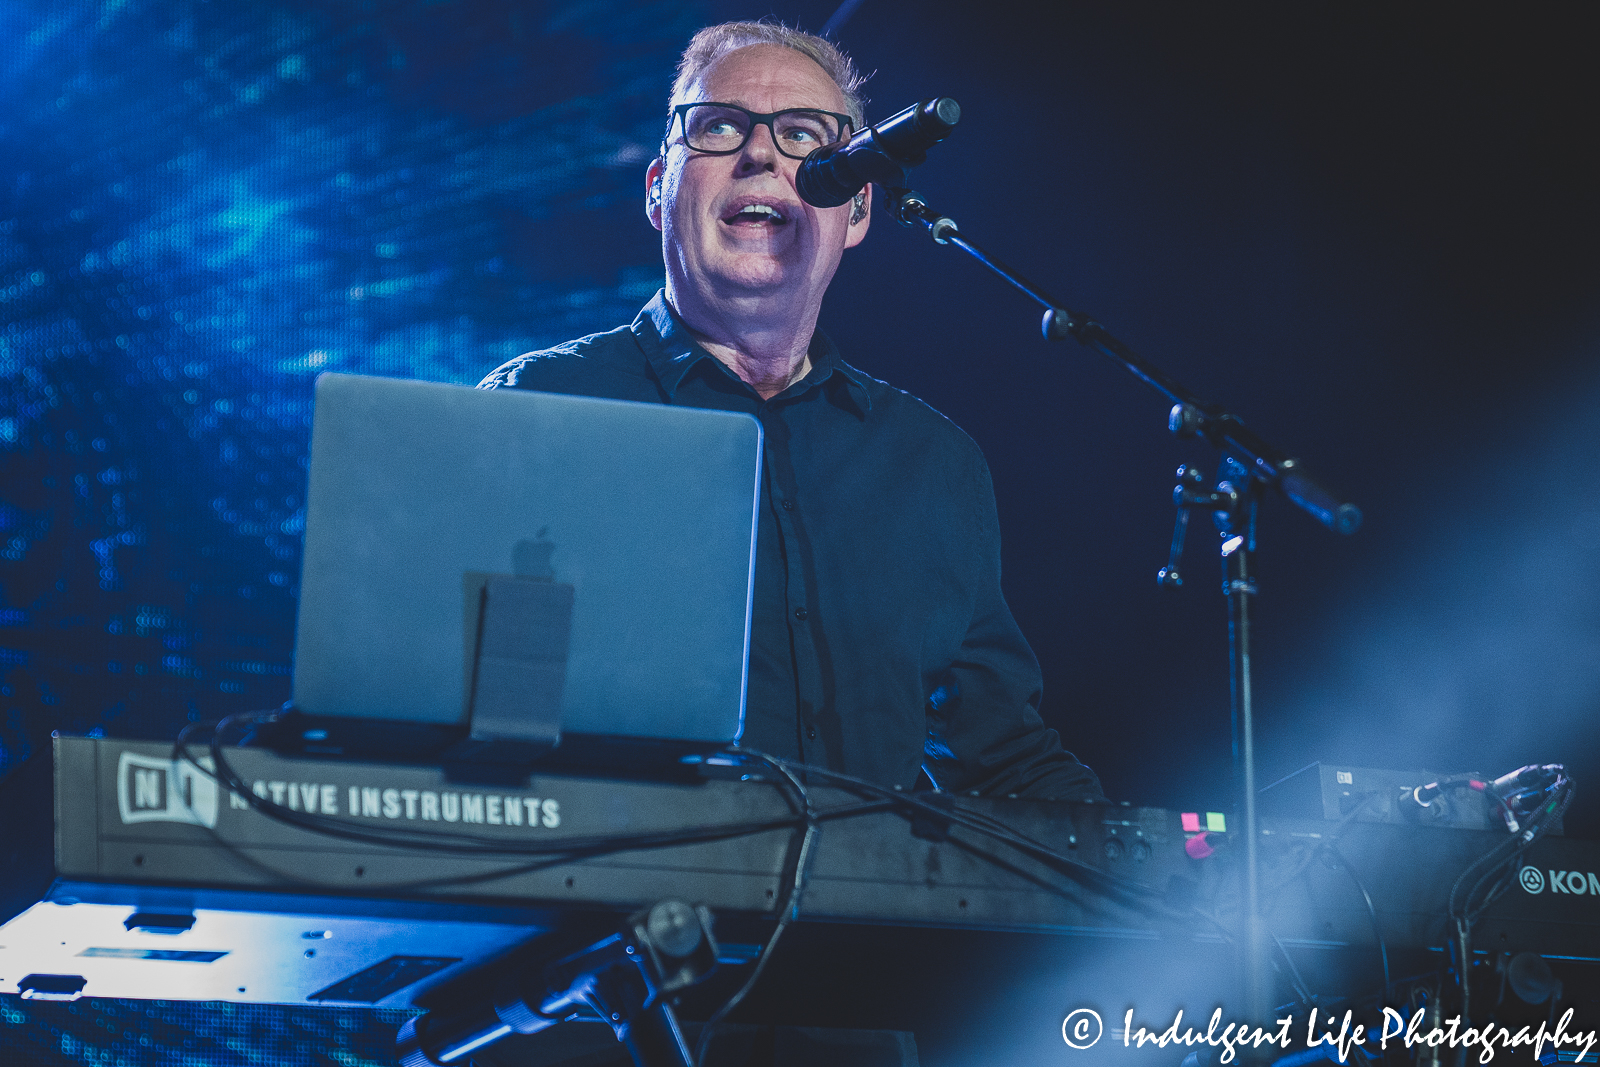 Orchestral Manoeuvres in the Dark keyboard player live in concert at The Truman in Kansas City, MO on May 8, 2022.